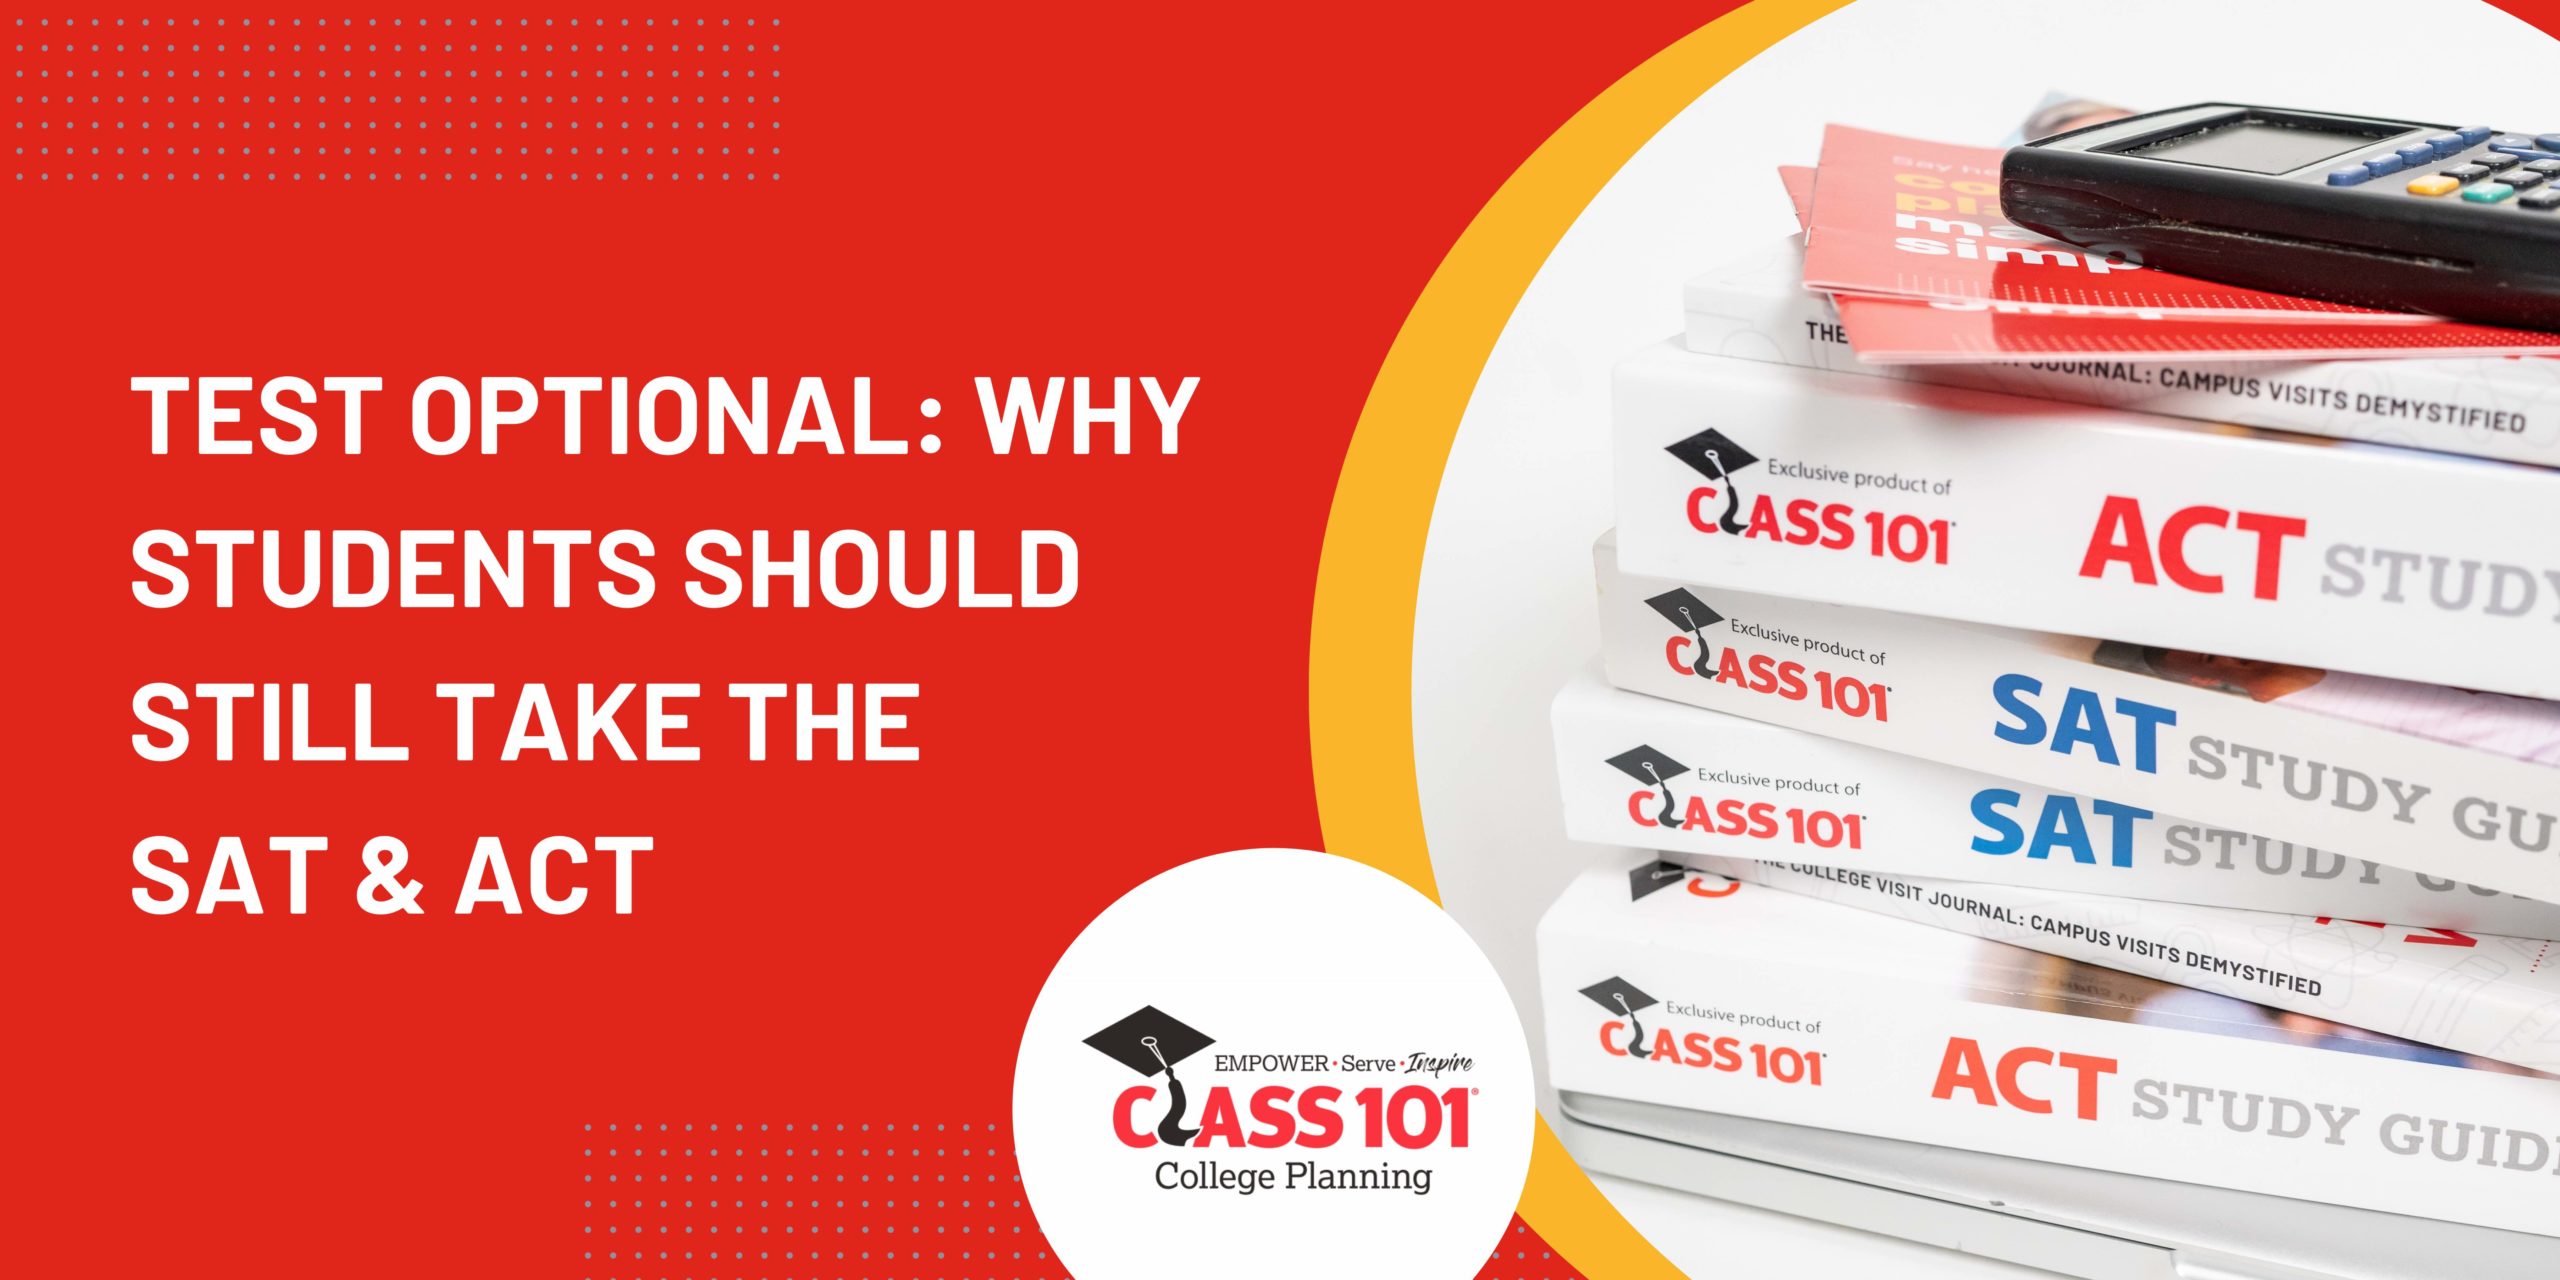 https://www.class101.com/bloomingtonin/wp-content/uploads/sites/10/2022/05/TEST-OPTIONAL-WHY-STUDENTS-SHOULD-STILL-TAKE-THE-SAT-ACT-1-scaled-1.jpeg